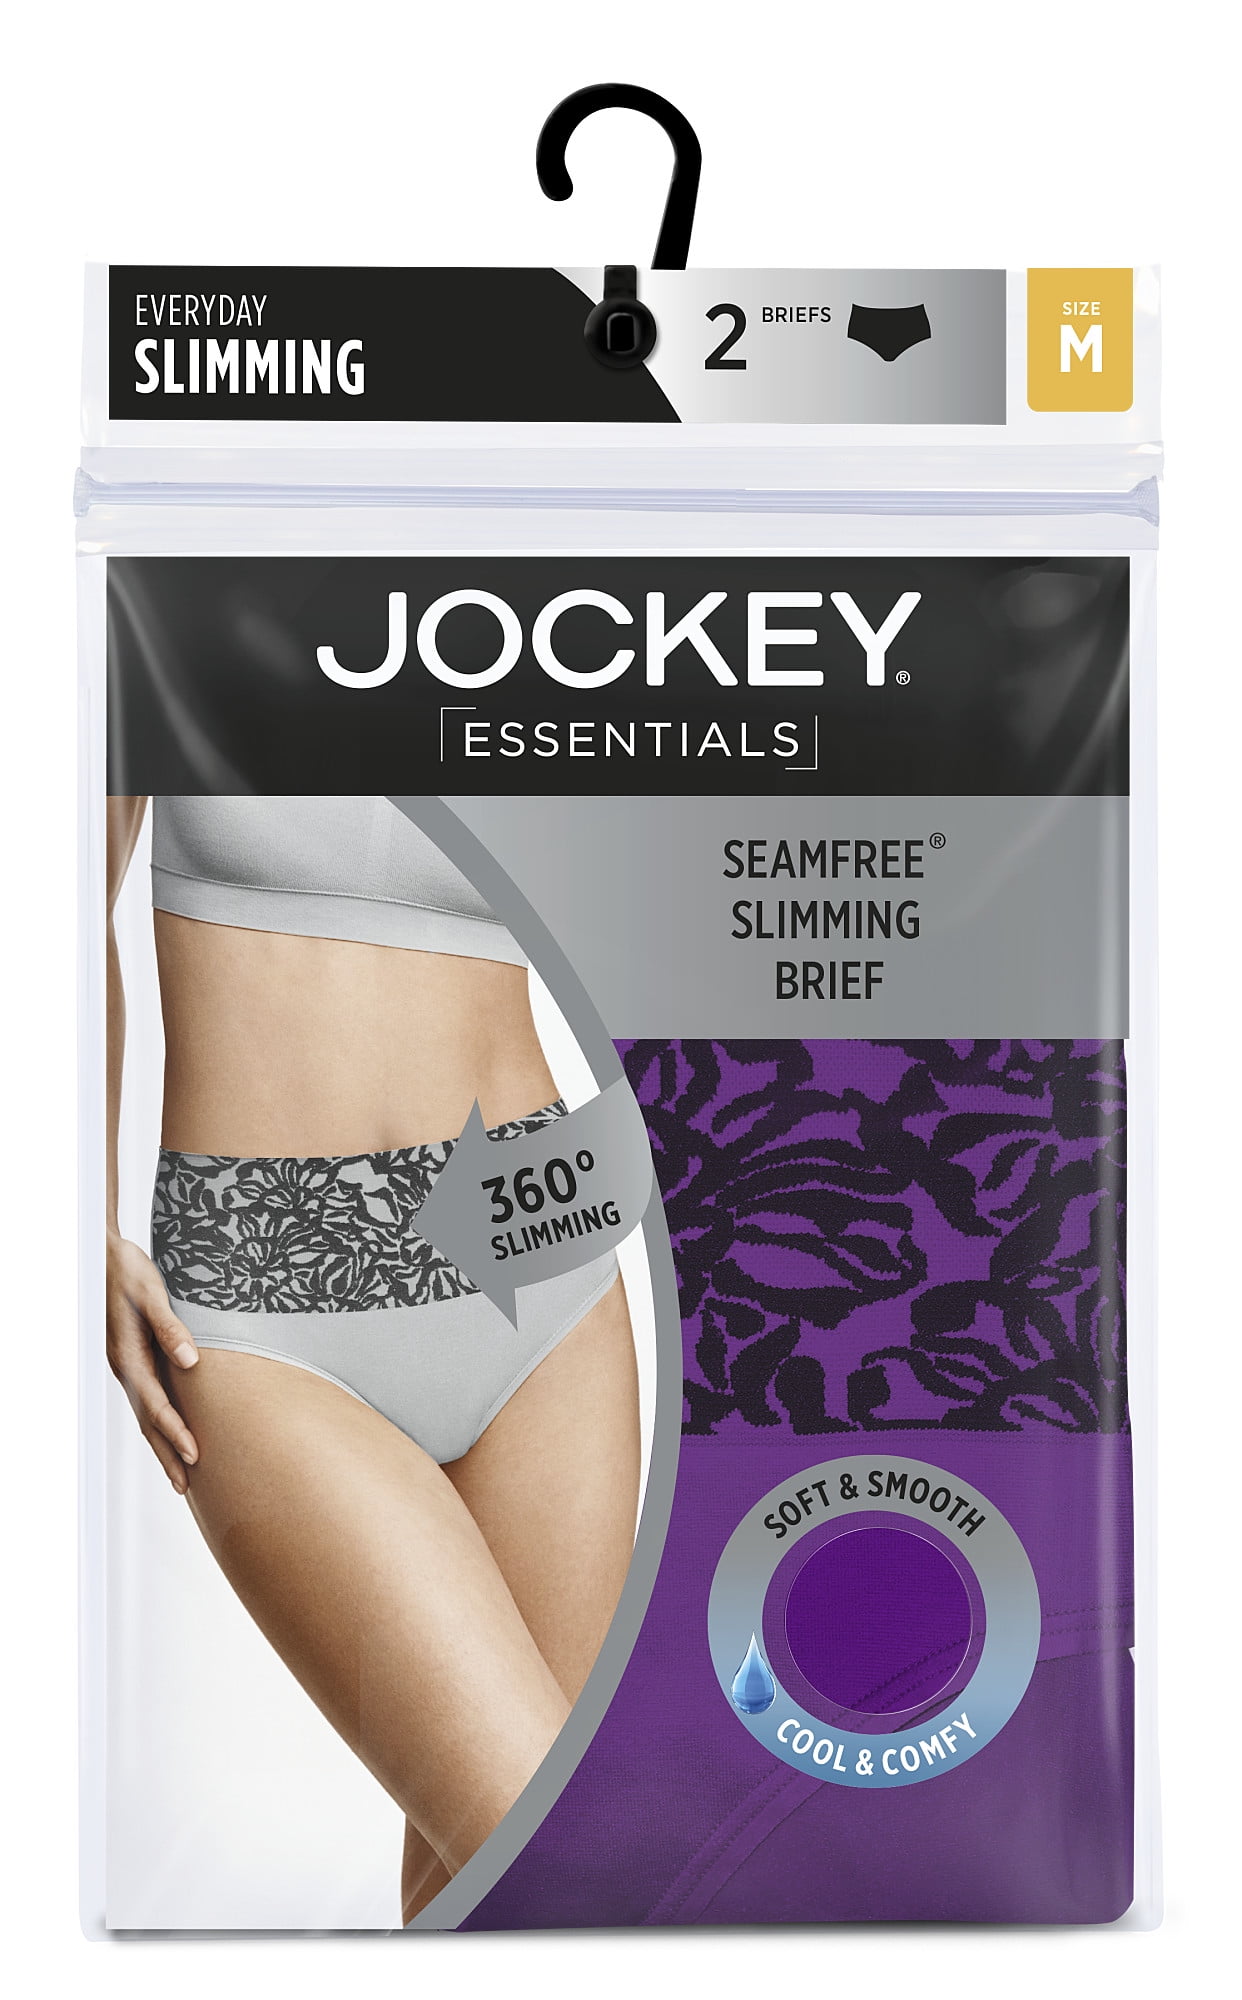 Jockey® Essentials Women's Seamfree® Slimming Brief Panties, Cooling  Shapewear, Tummy Smoothing Underwear, Pack of 2, Sizes Small-3XL, 5353 